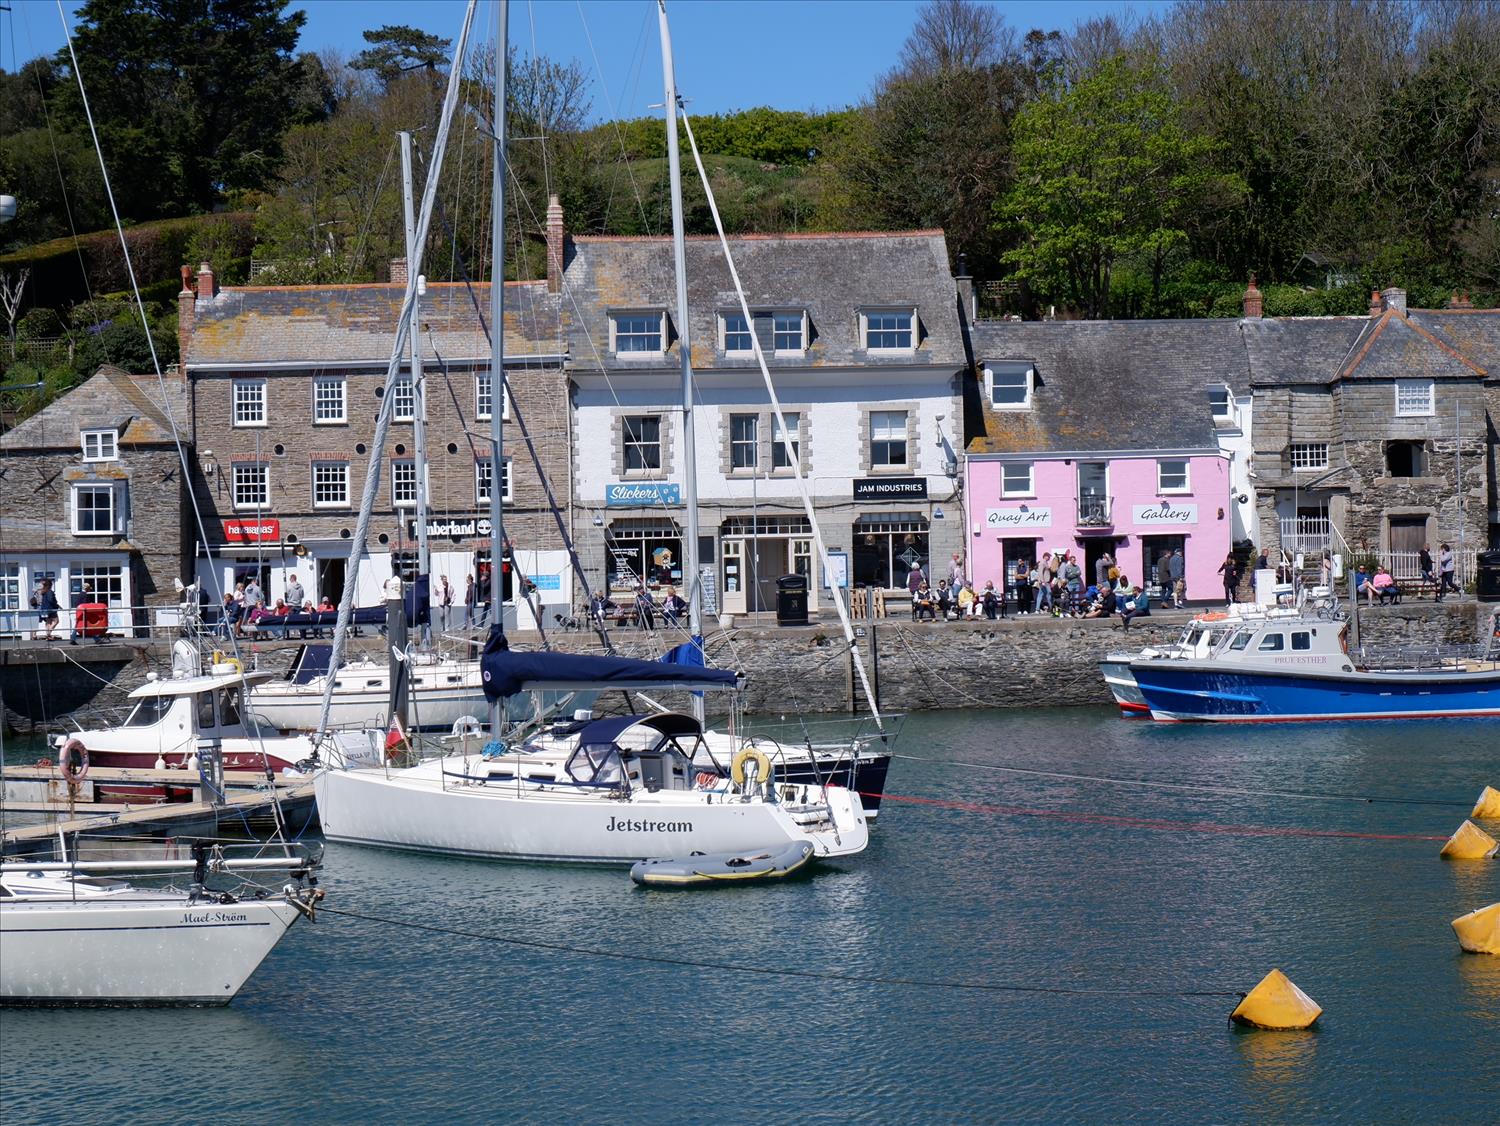 Boats in Padstow Harbour, with tourists exploring the shops and restaurants on the harbour front